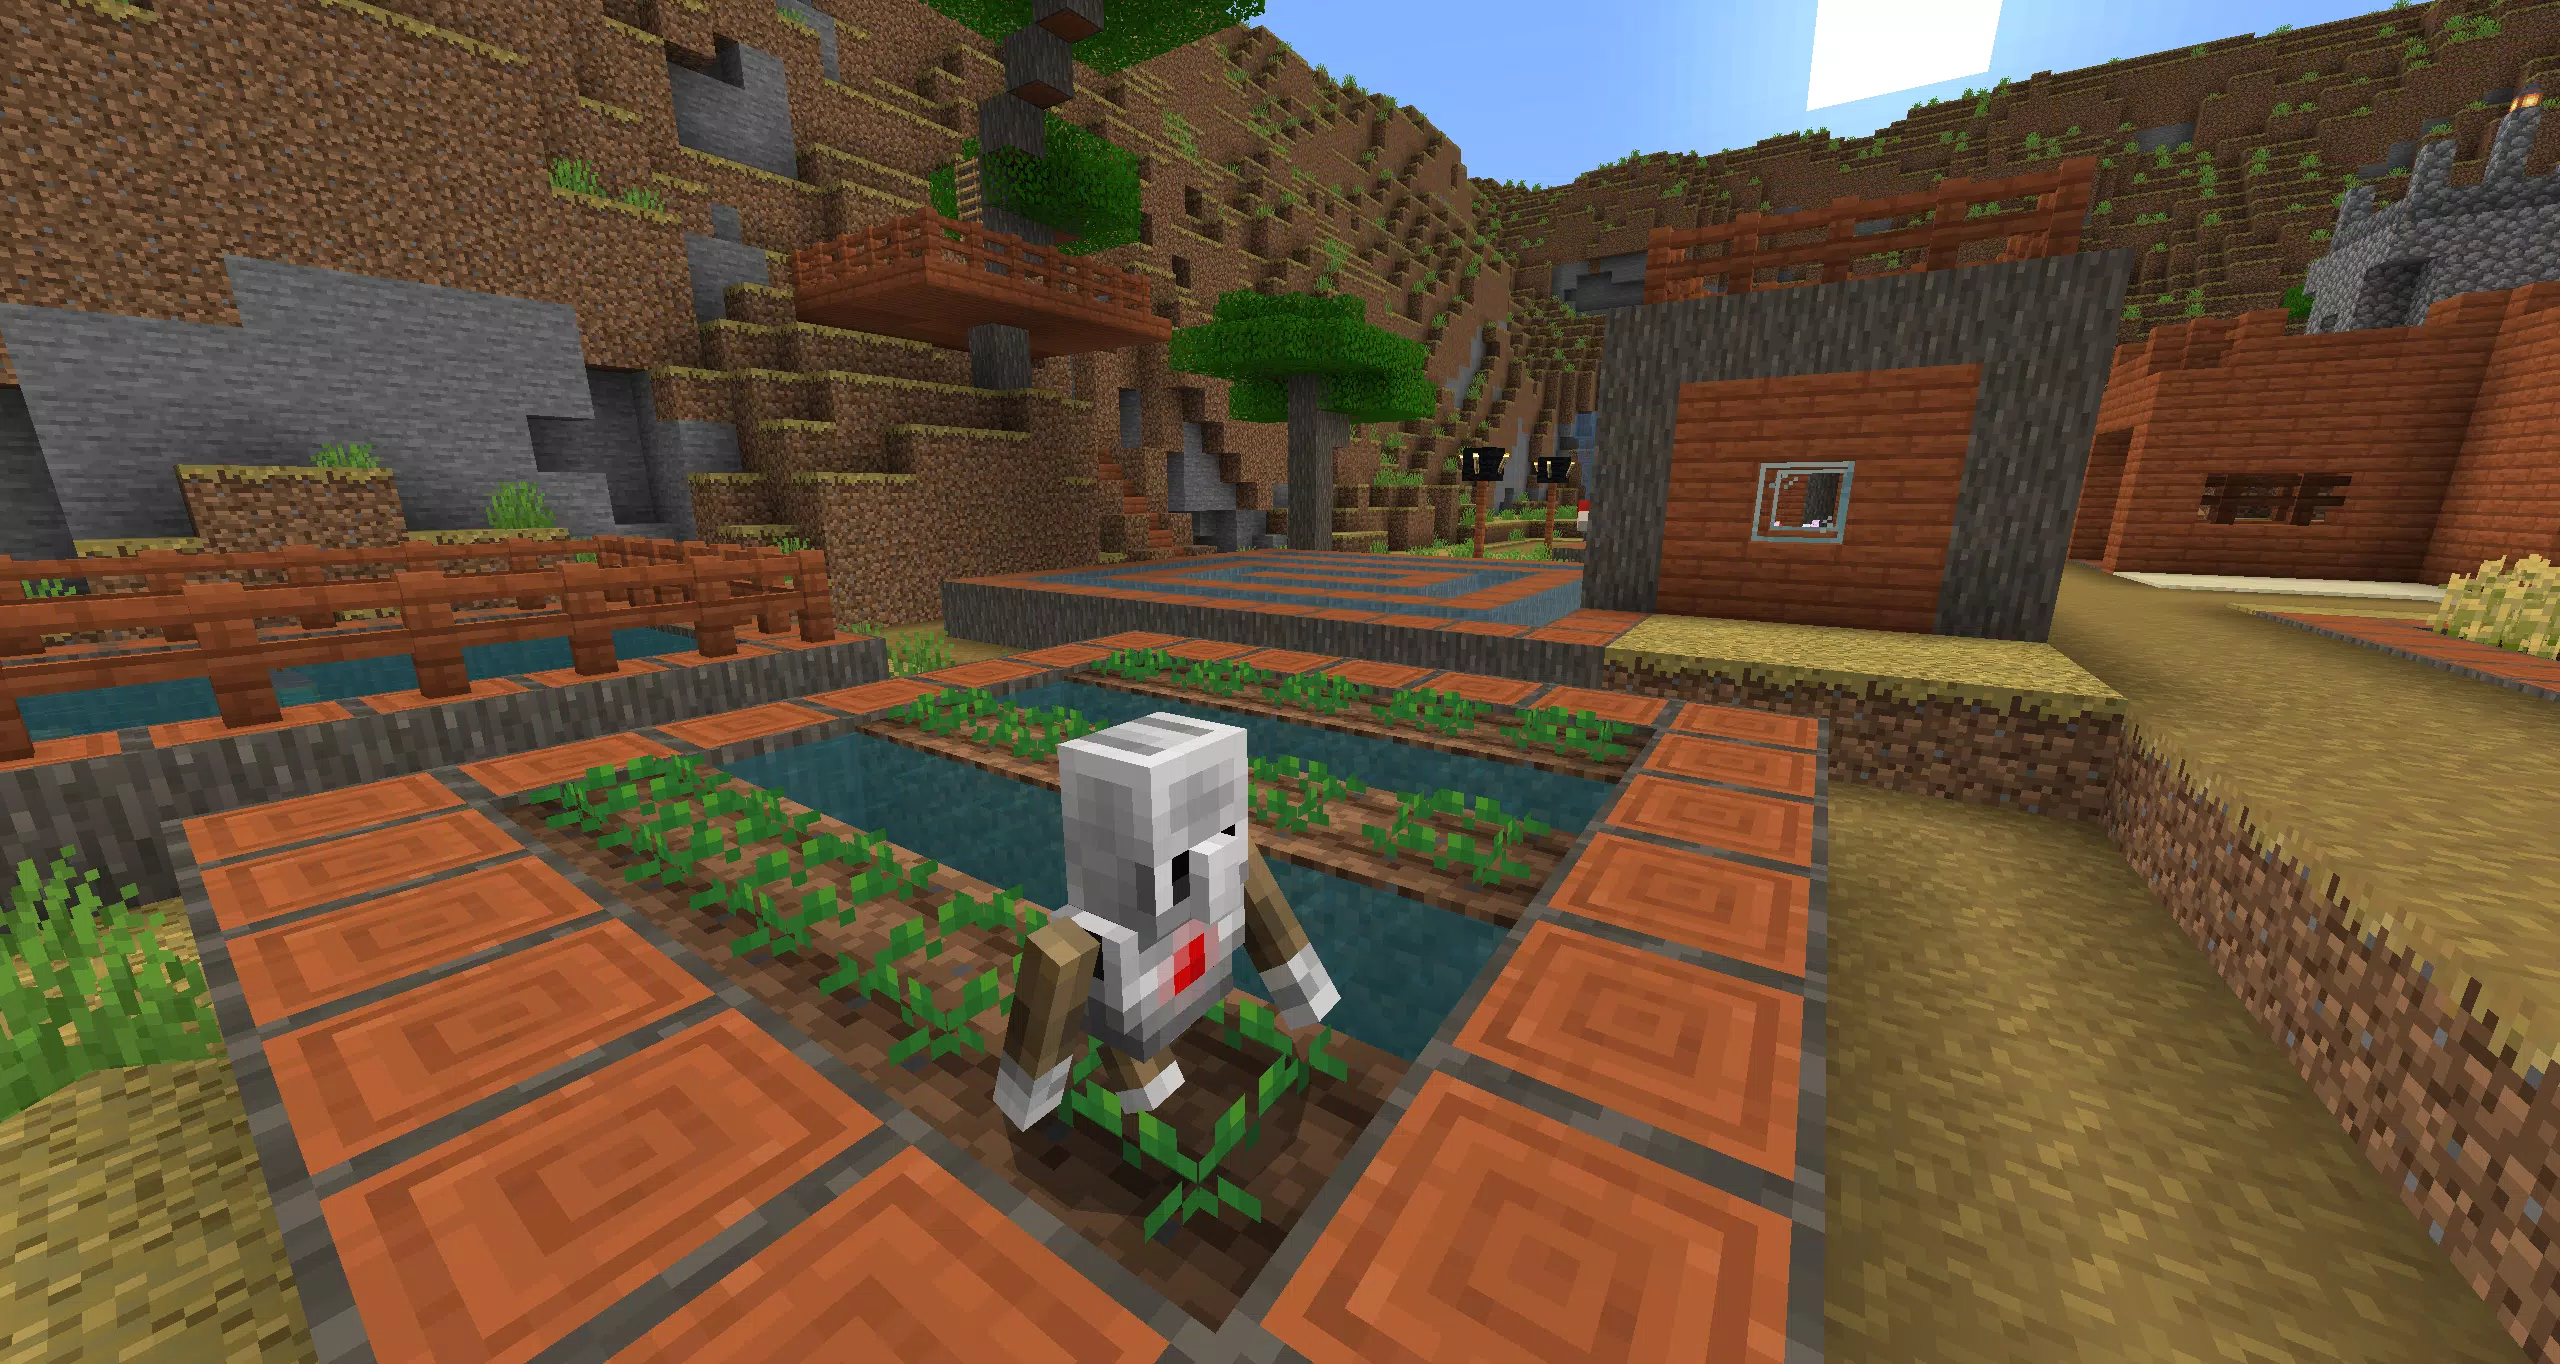 Download Minecraft PE 1.19.83 apk free: Trails and Tales